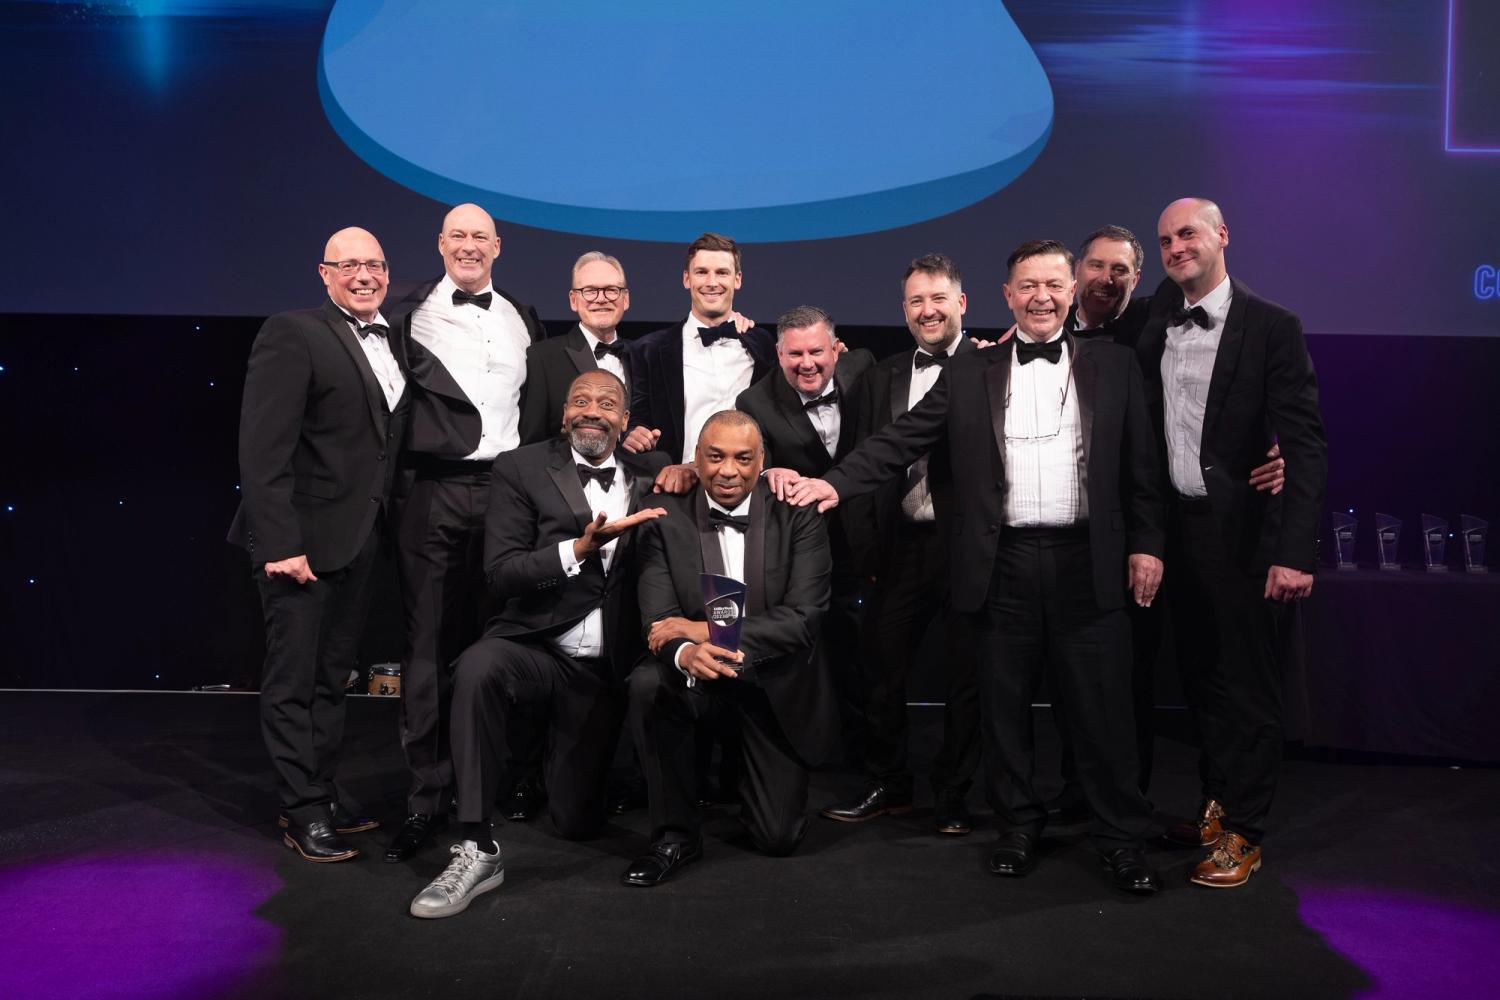 South East Water received the Utility Week Infrastructure Delivery Award in partnership with DDS Contracting and AtkinsRéalis.